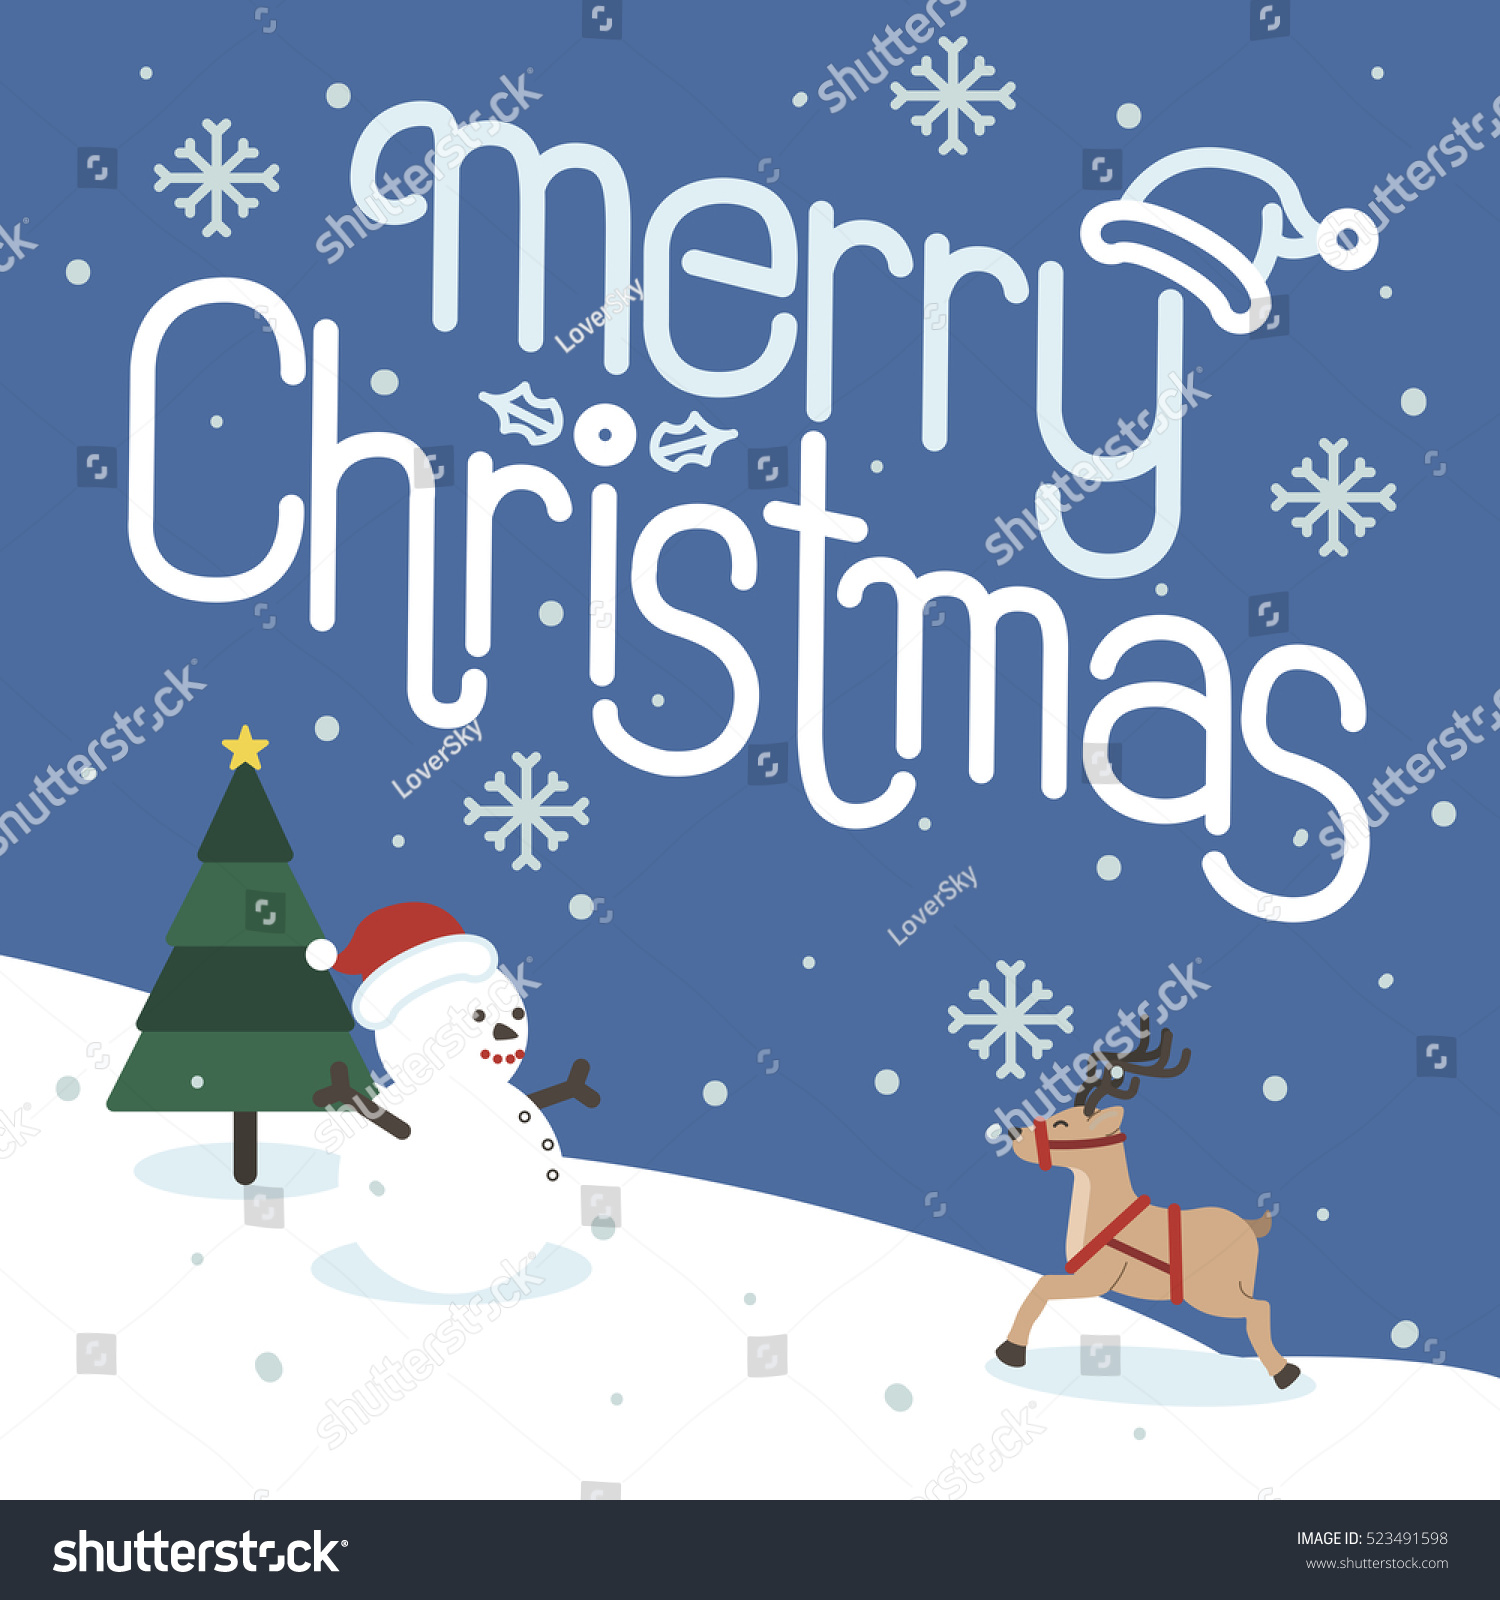 Merry Christmas and Happy New Year Christmas tree Snowman and reindeer